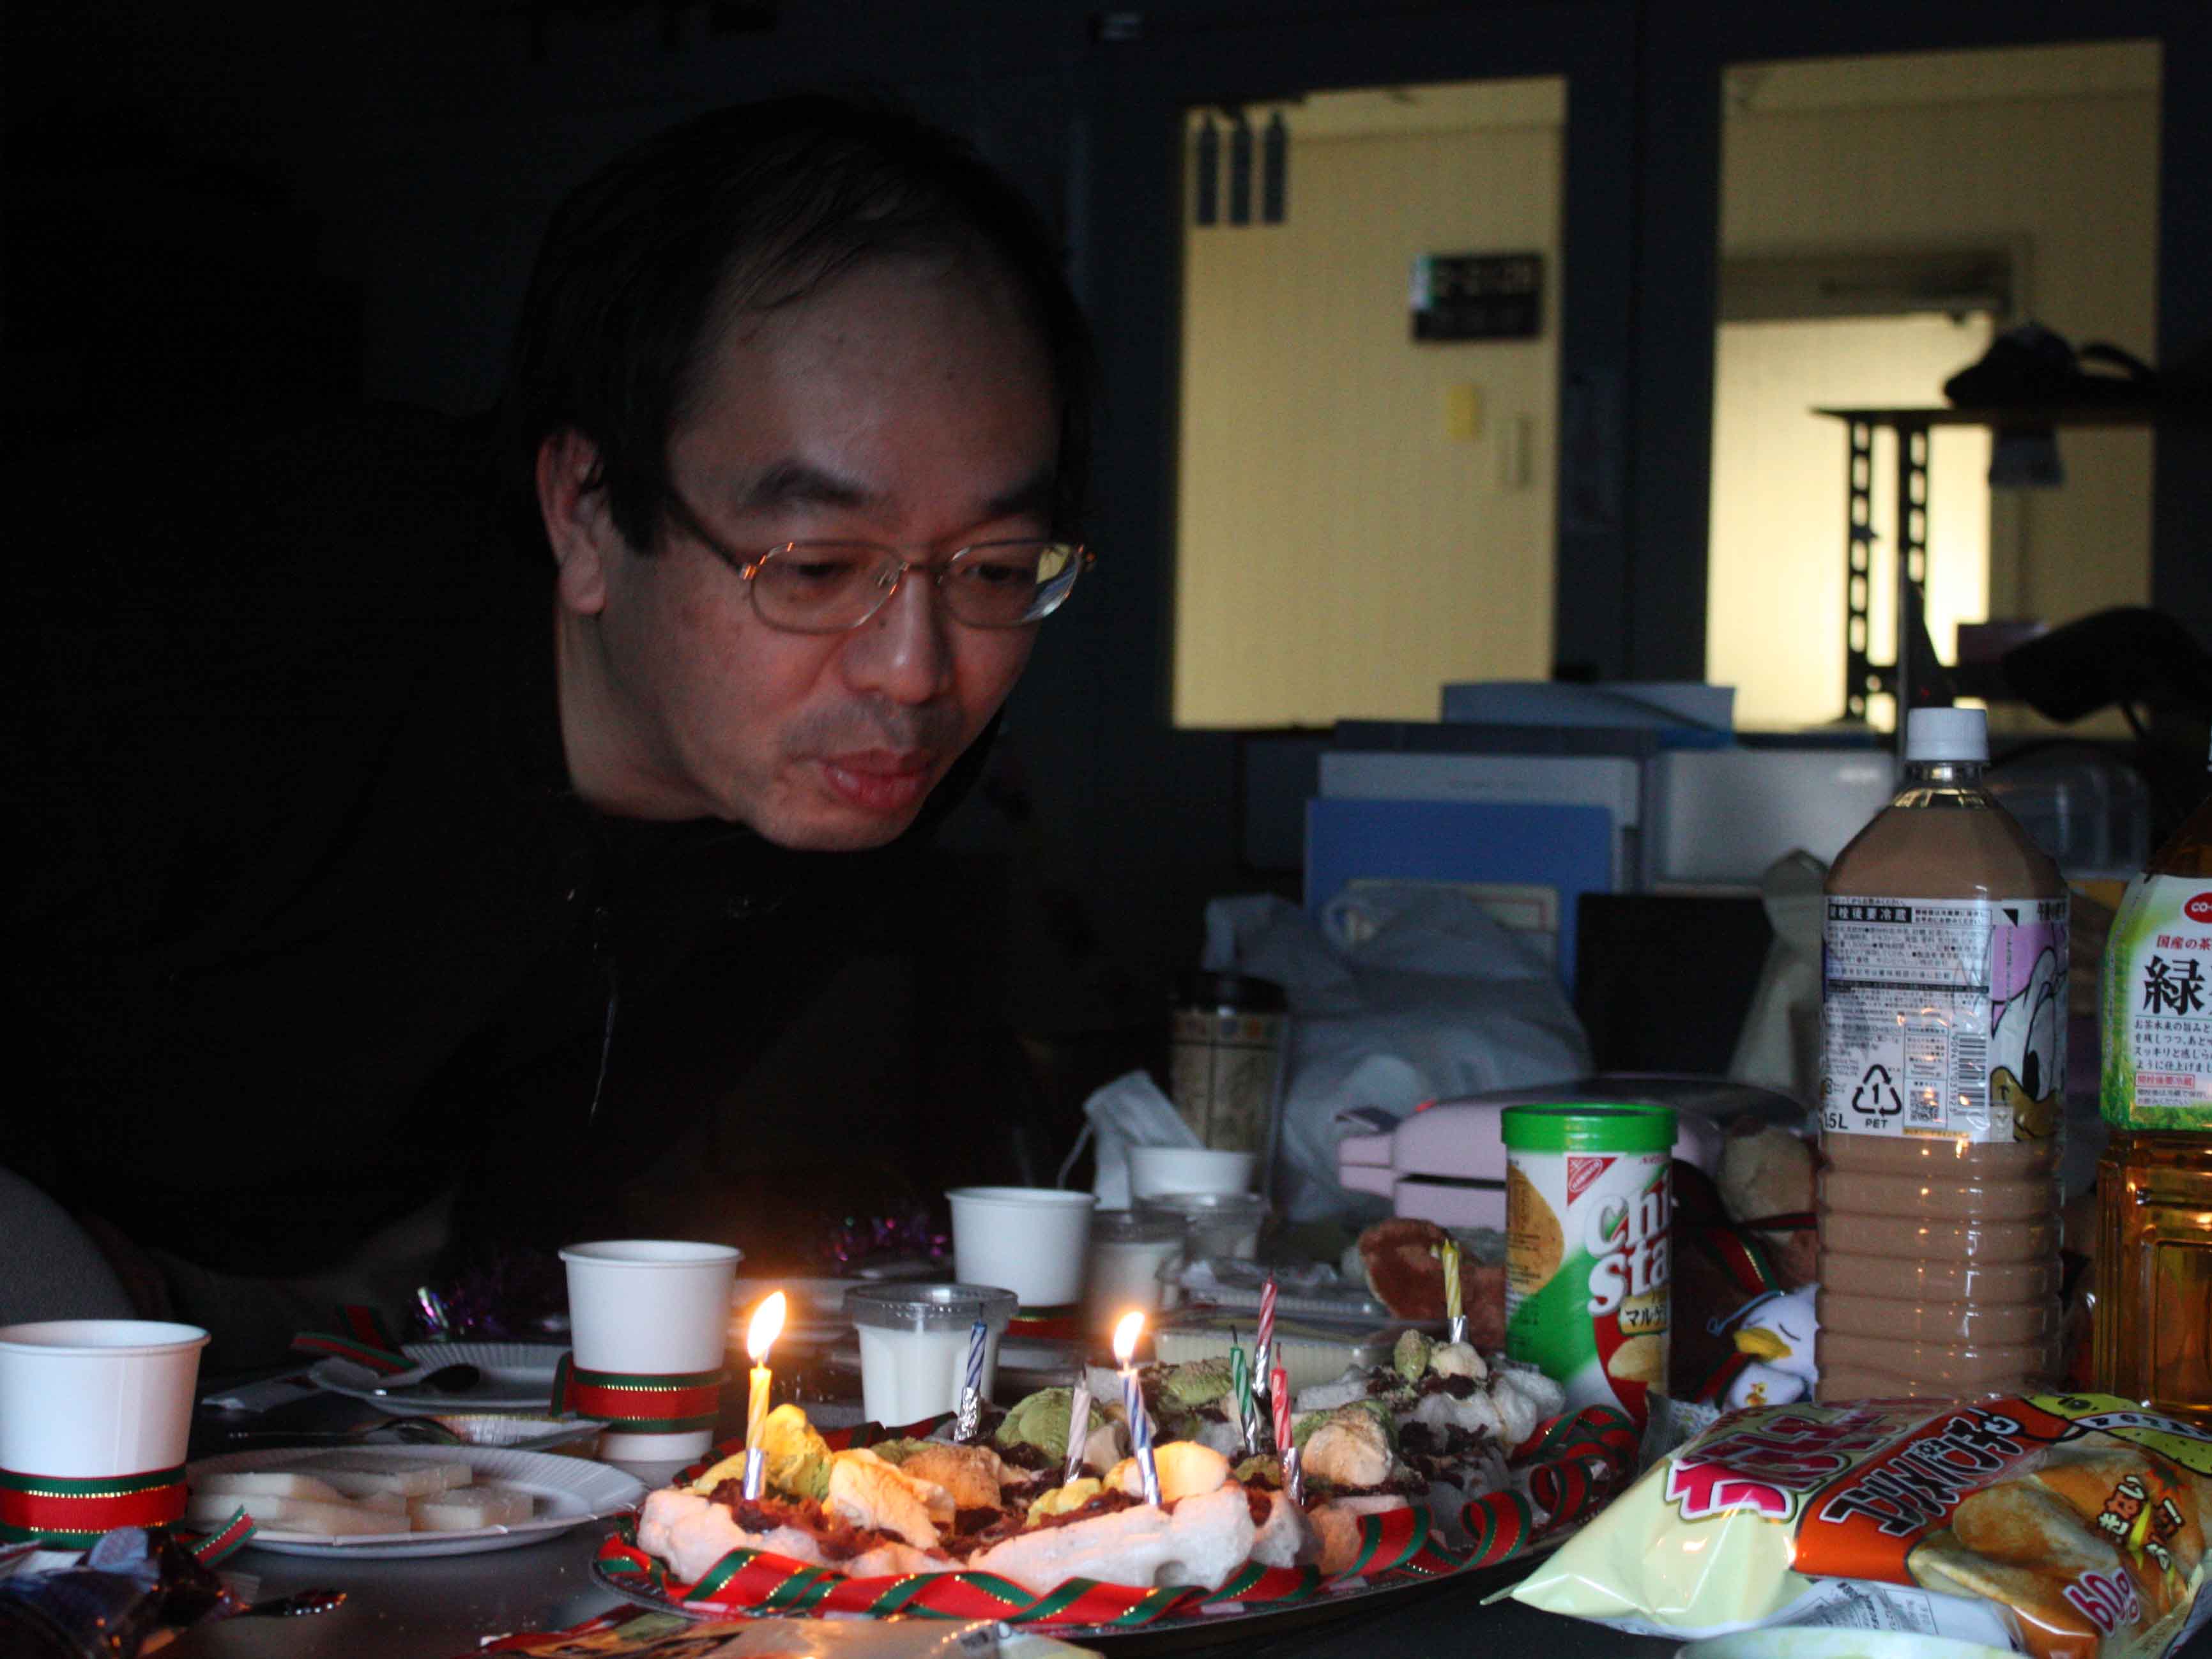 Birthday party of Assistant Prof. Hasegawa A